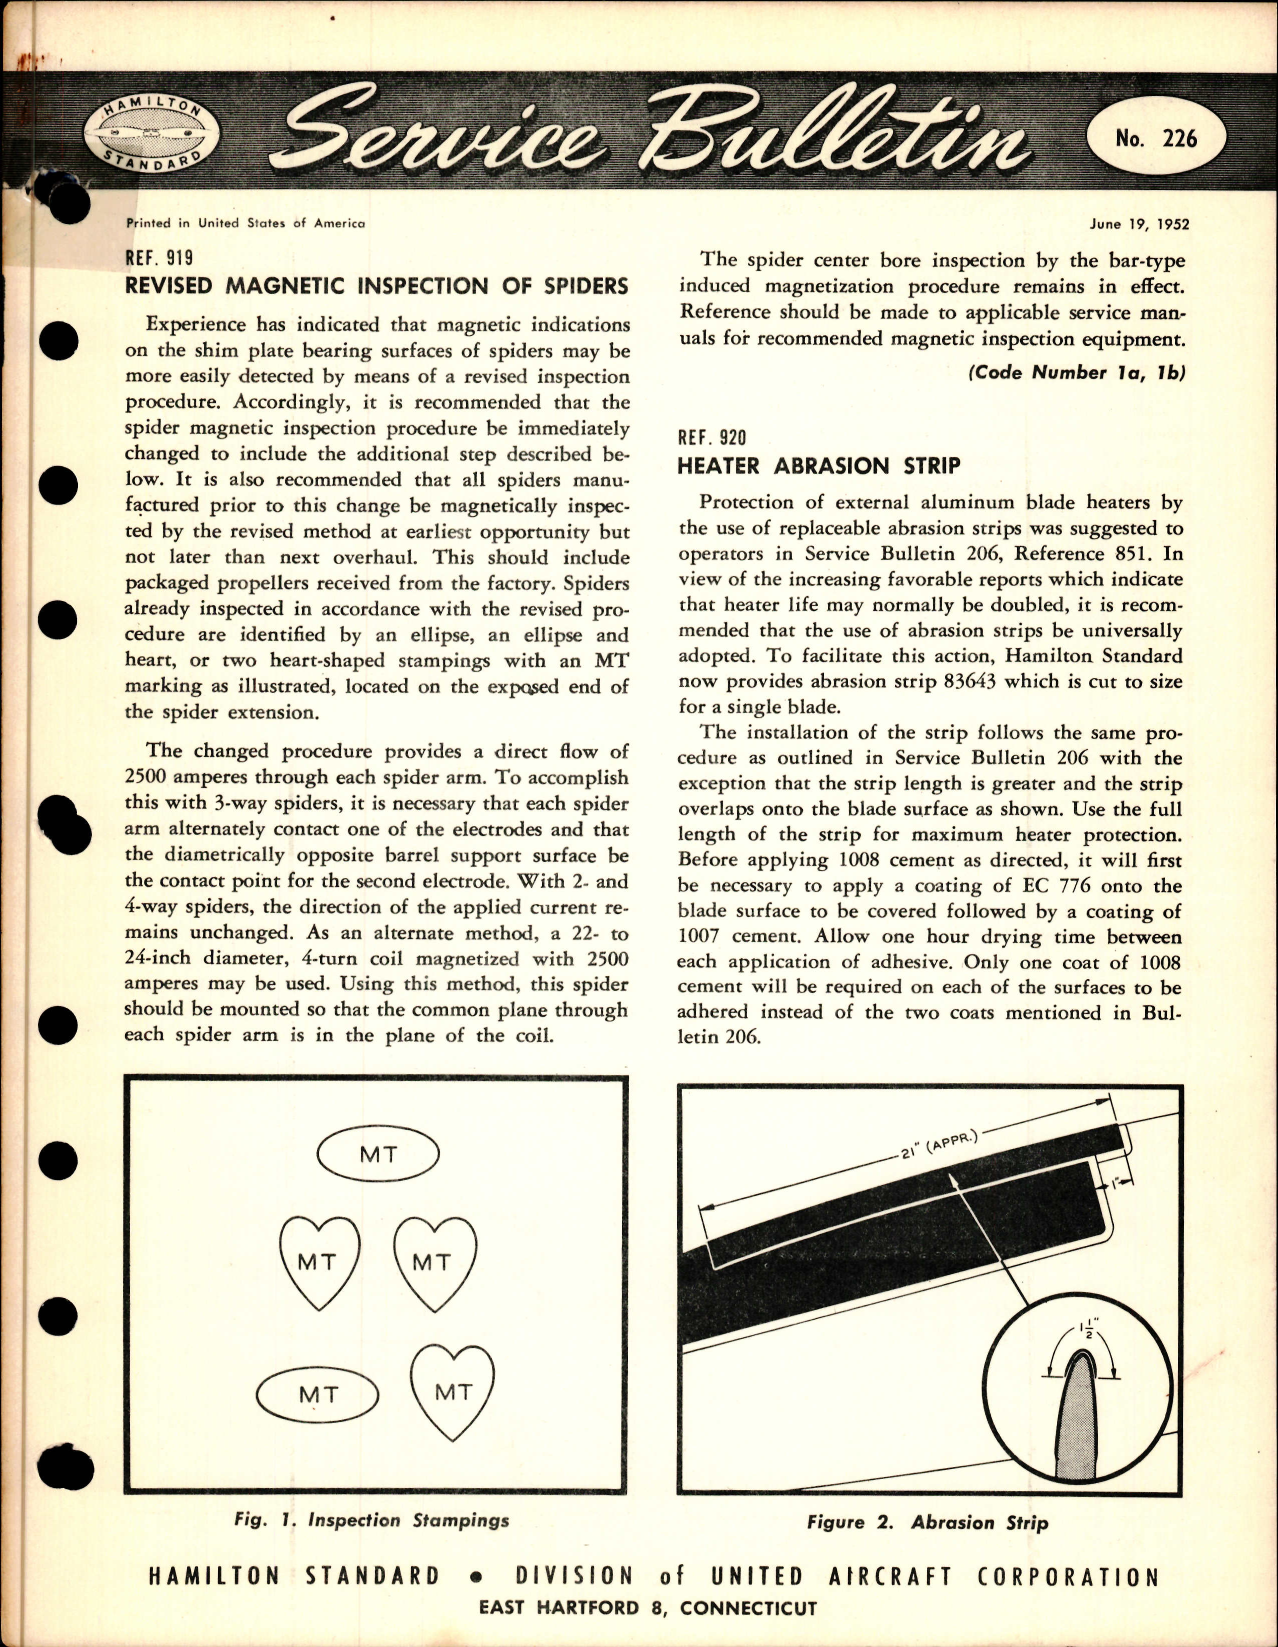 Sample page 1 from AirCorps Library document: Revised Magnetic Inspection of Spiders, Ref 919